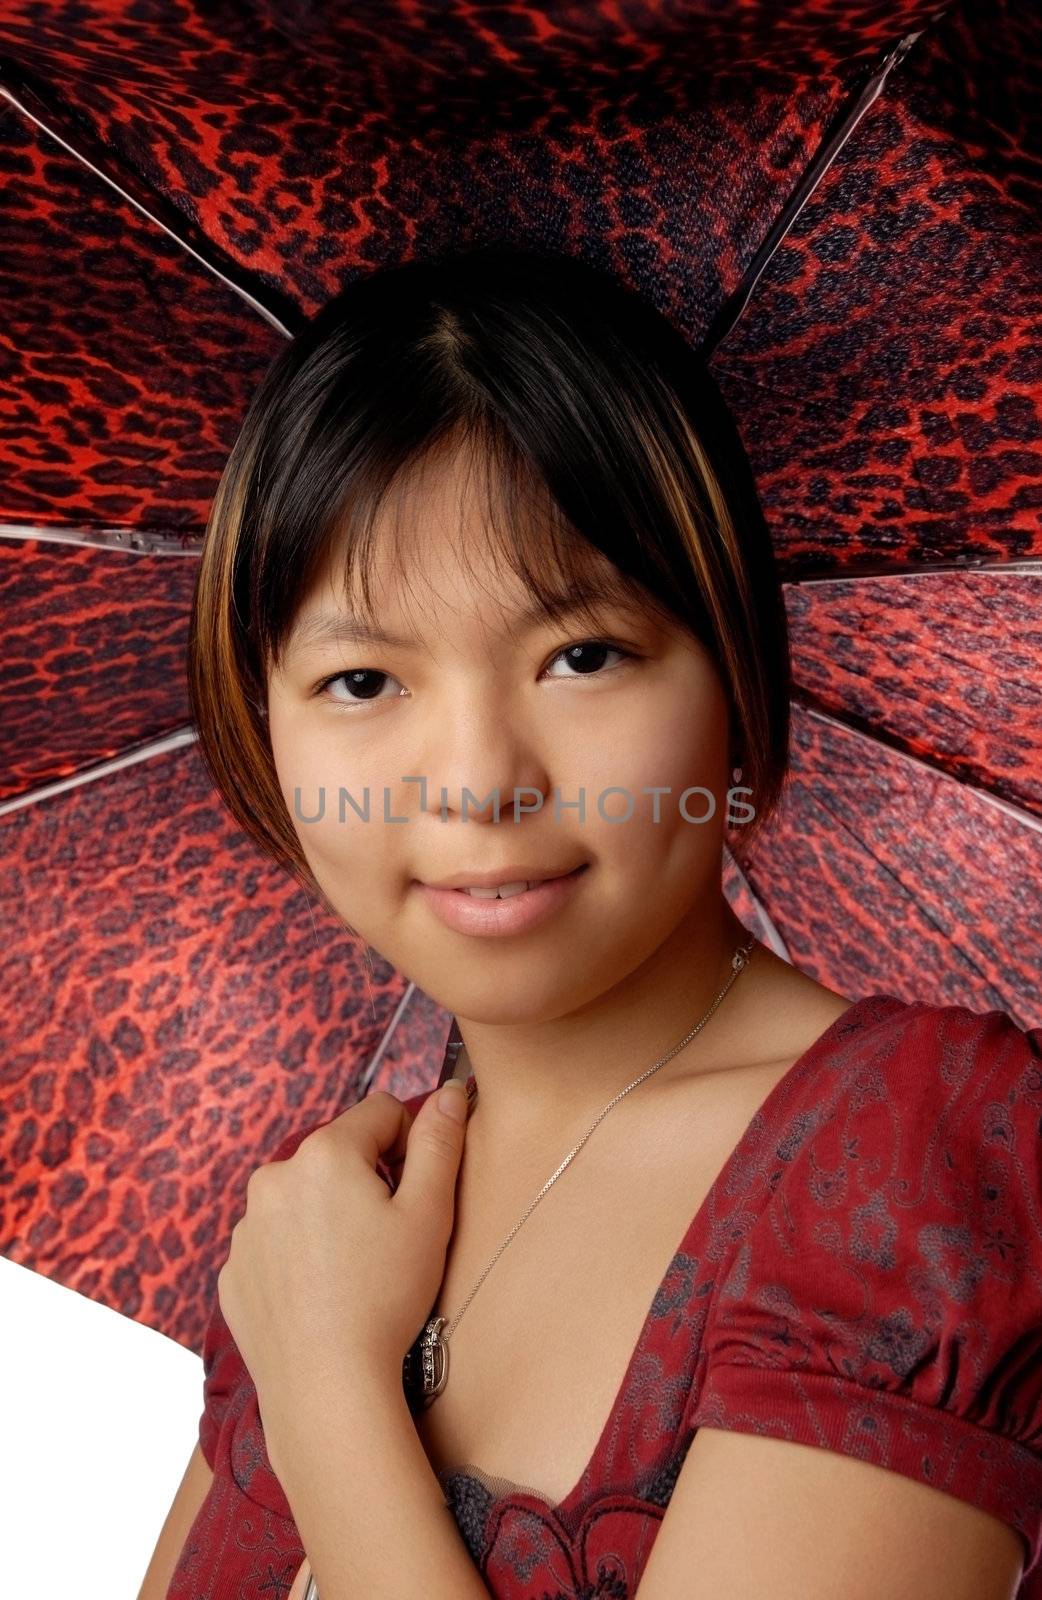 Cute Asian girl with red spotty fashionable umbrella